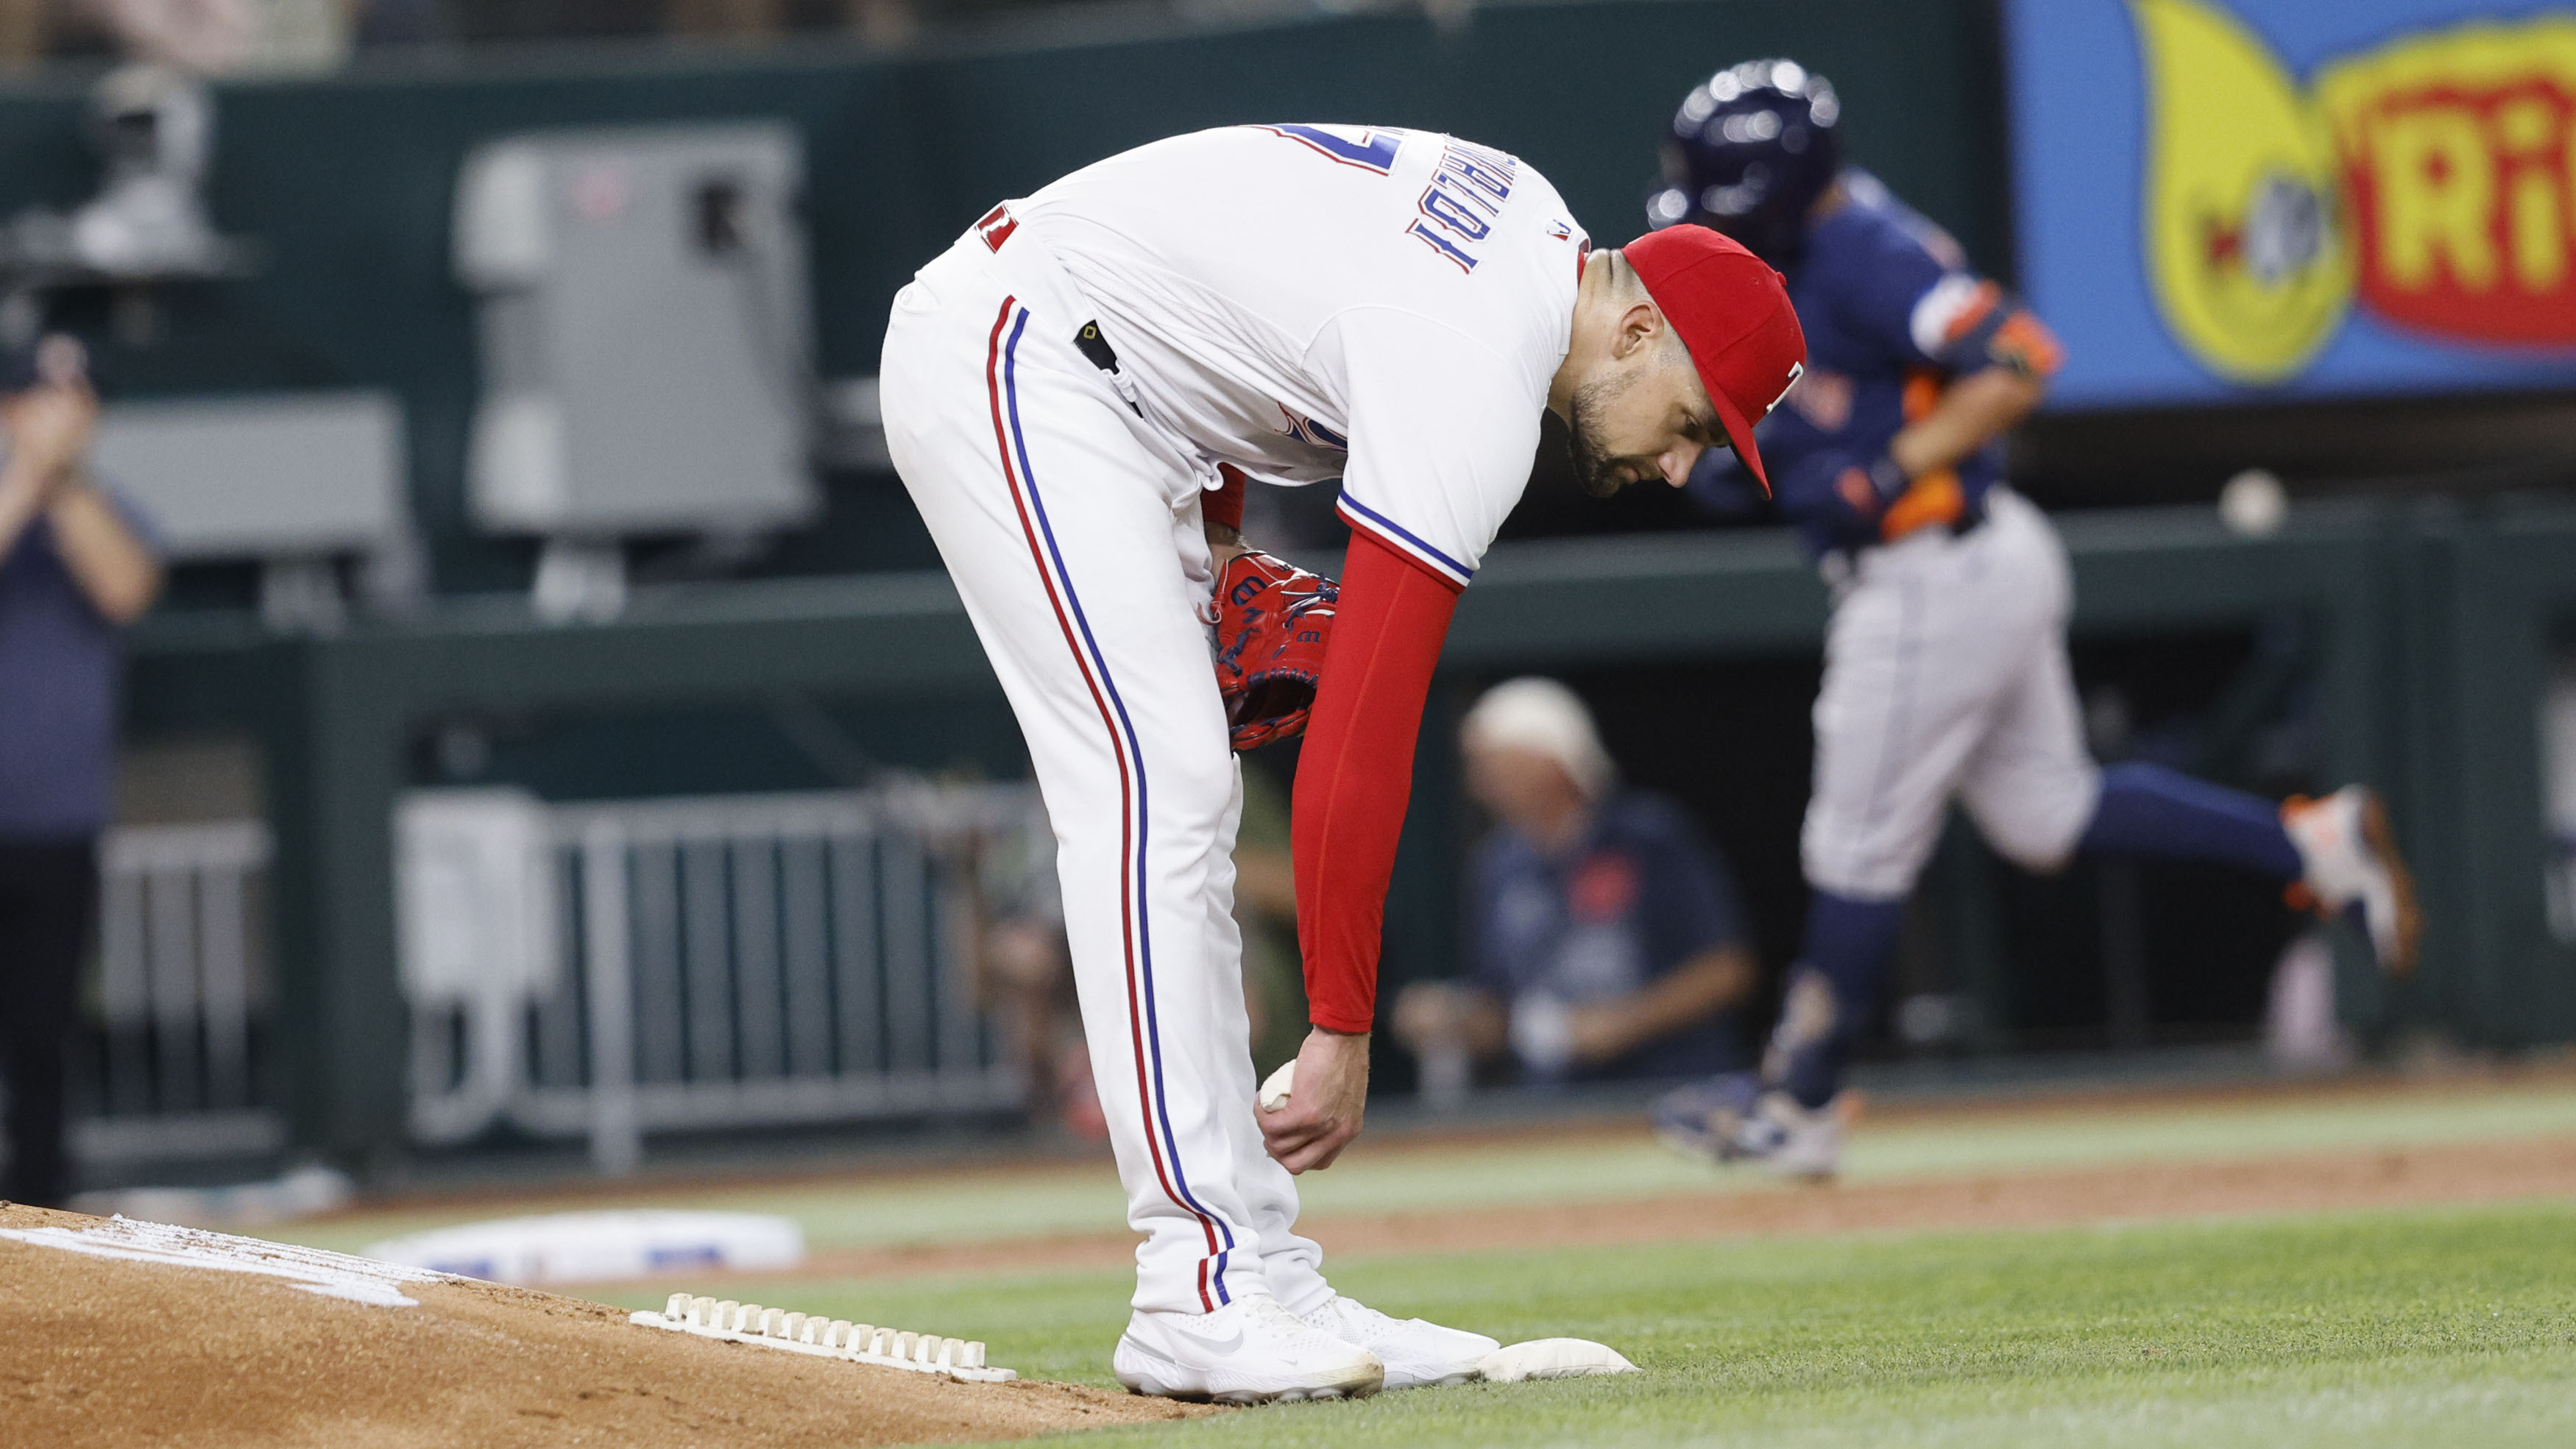 3 takeaways from Rangers' crushing loss to Astros: Early trouble